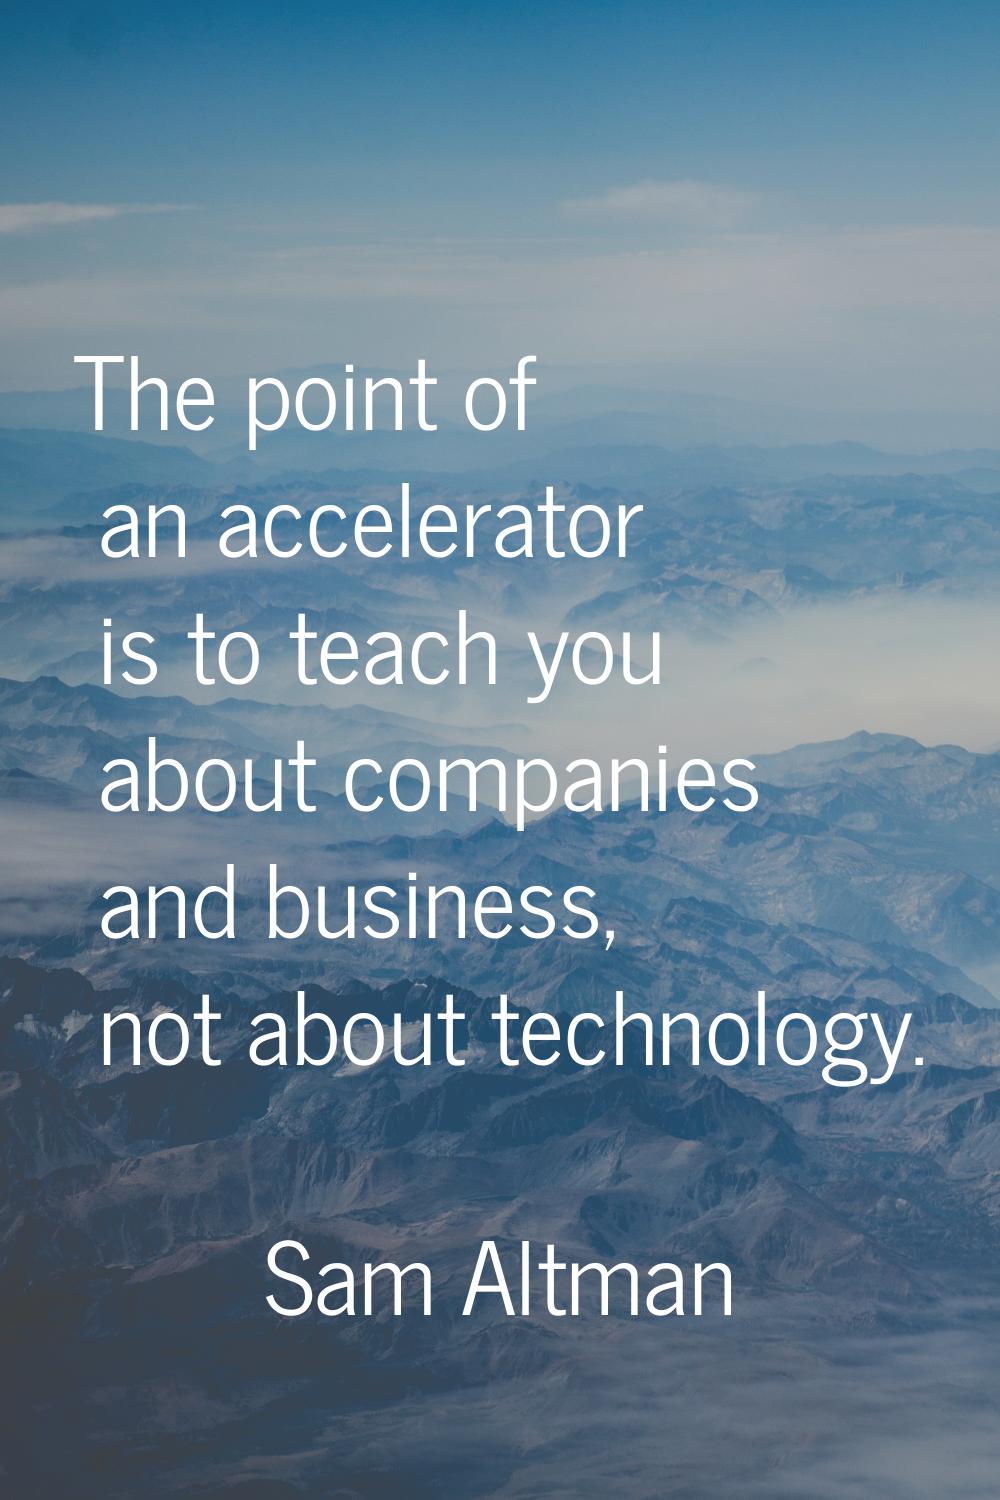 The point of an accelerator is to teach you about companies and business, not about technology.